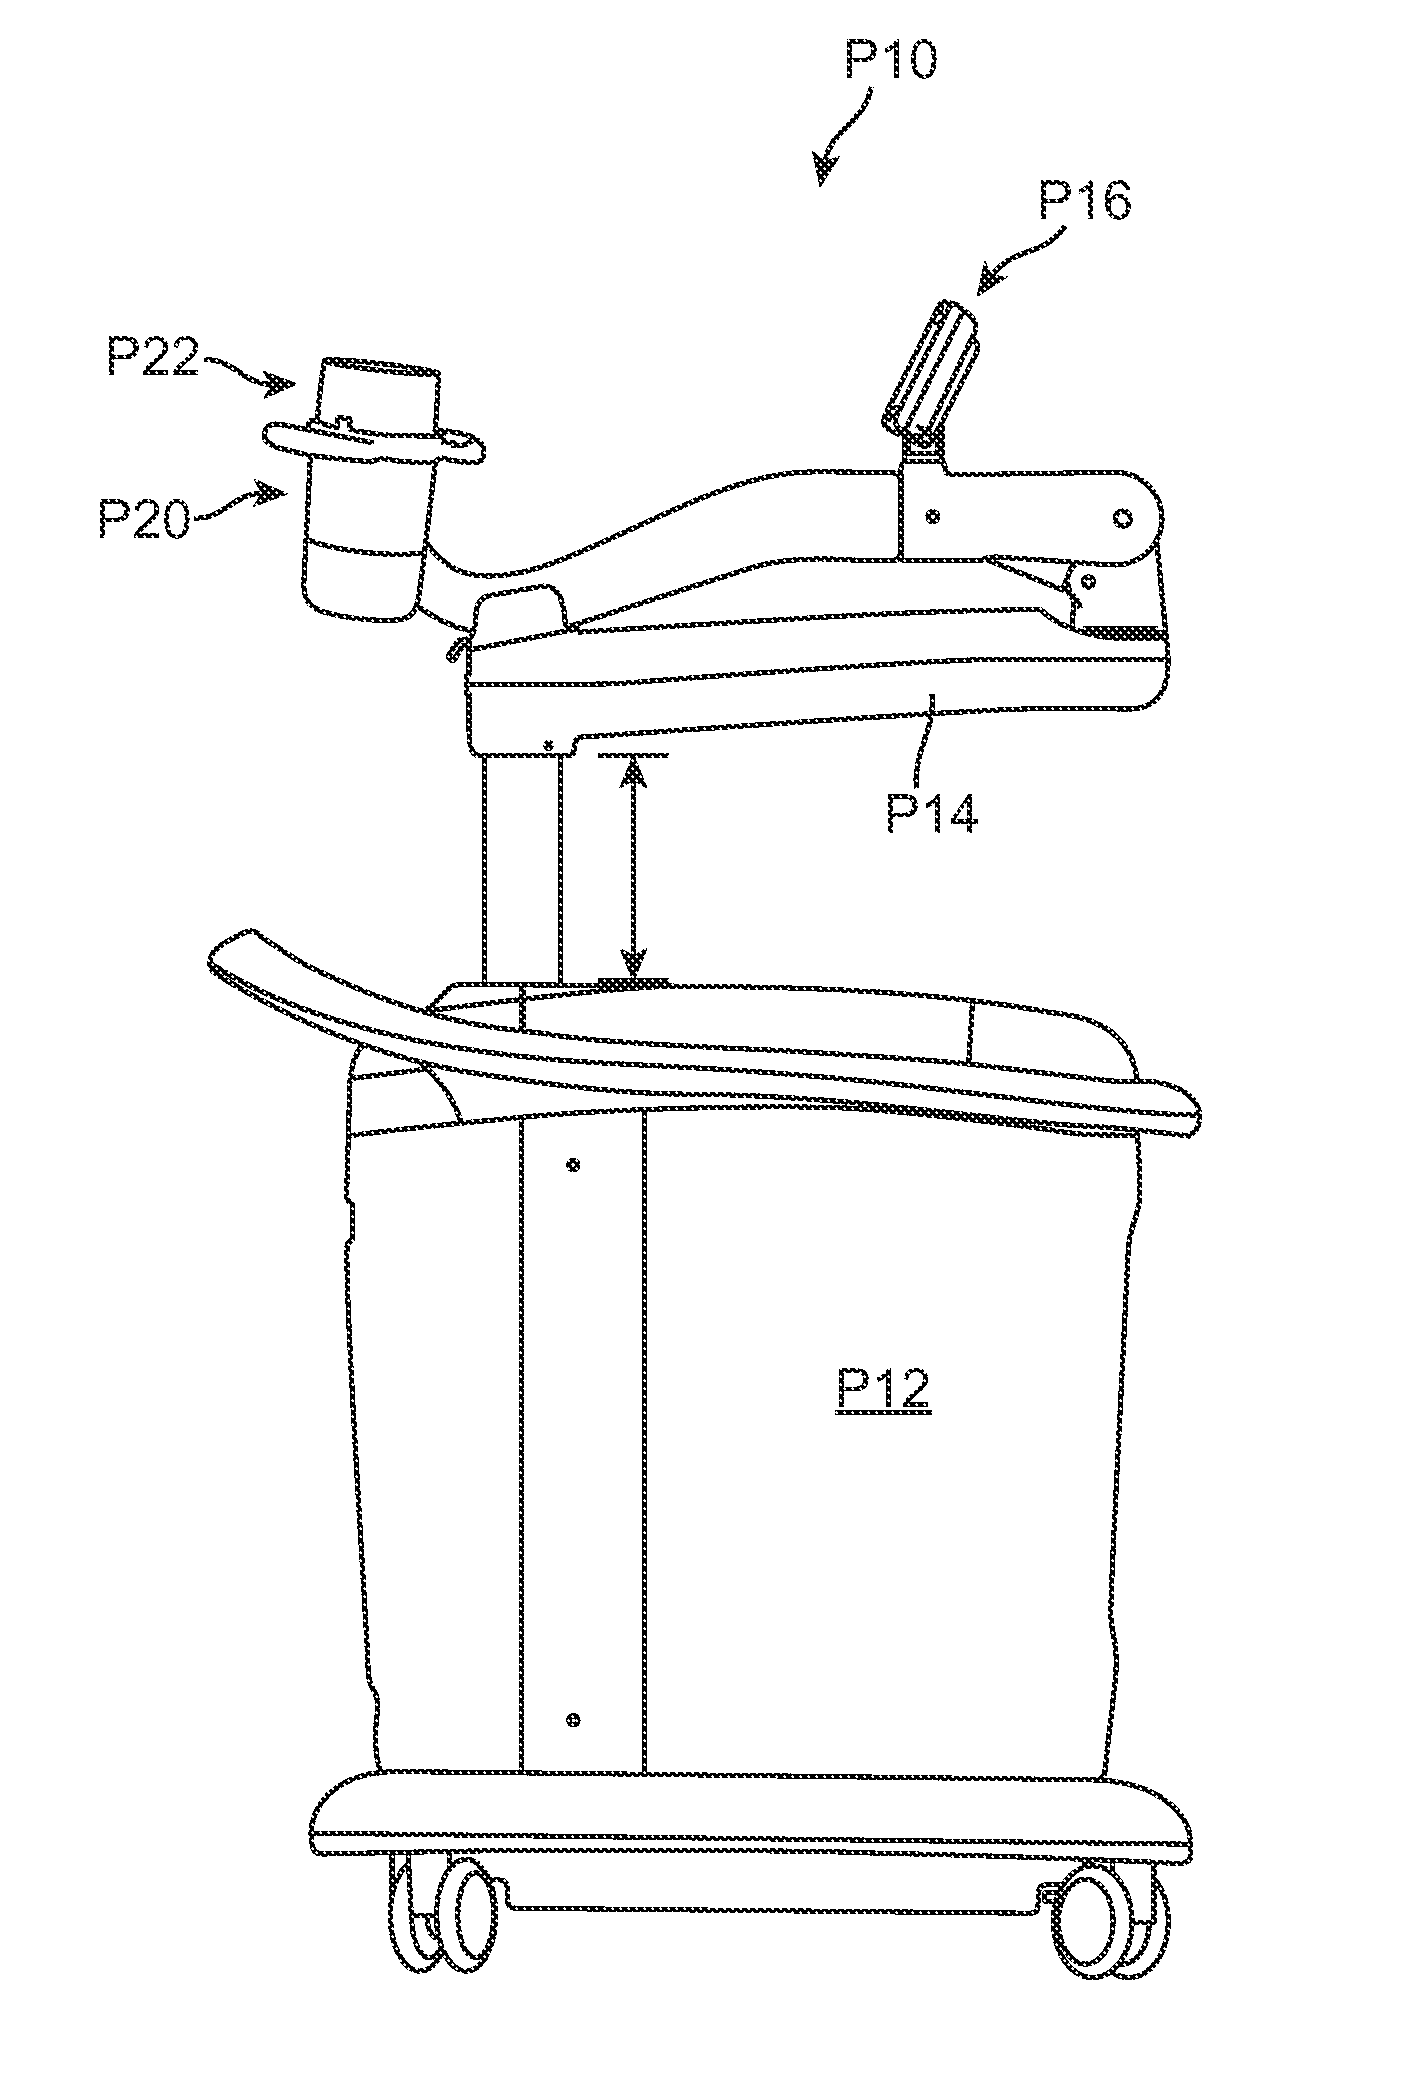 Apparatus and methods for non-invasive body contouring